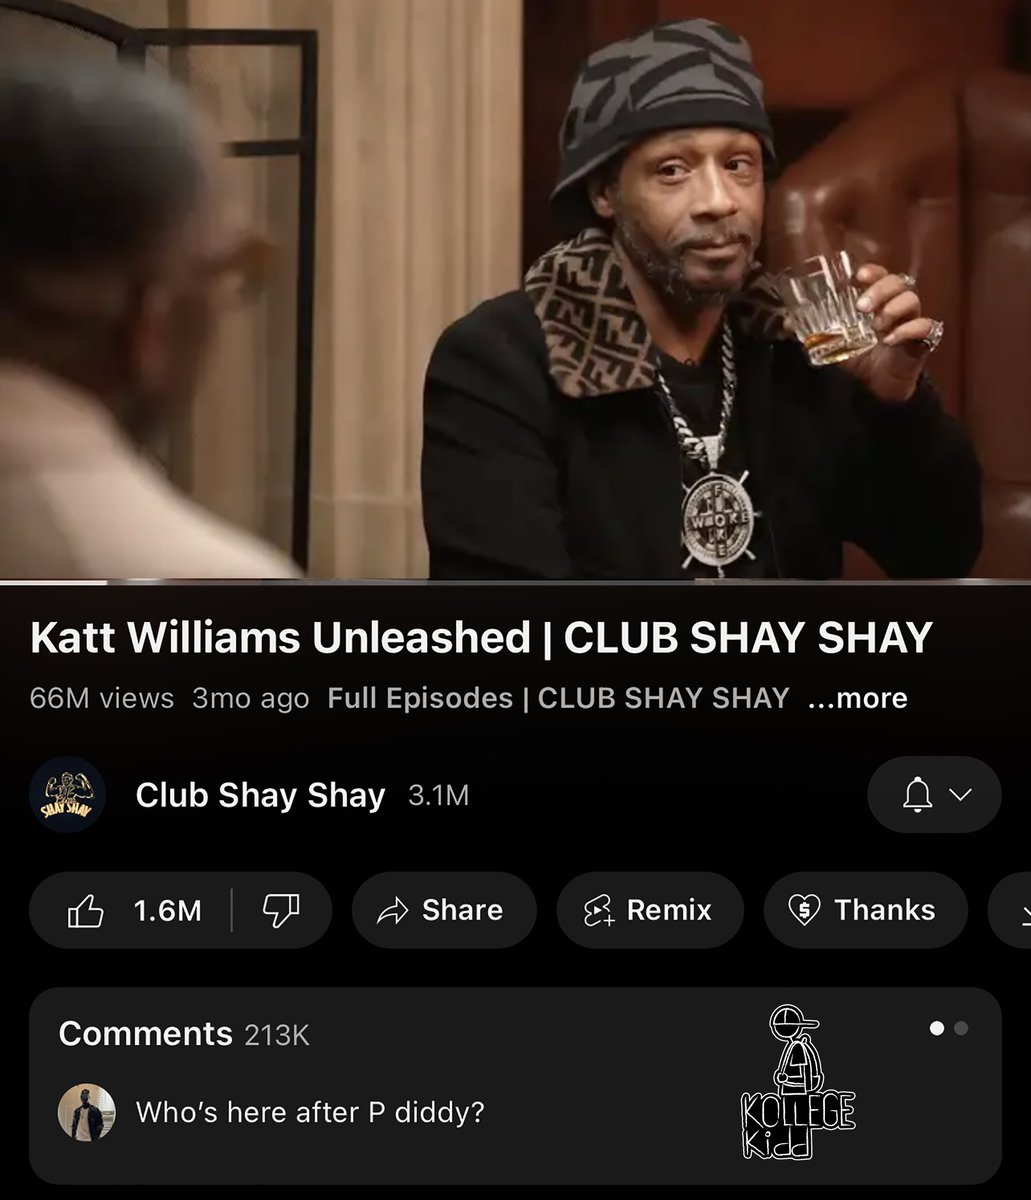 Katt Williams 'Club Shay Shay' interview with Shannon Sharpe is 2M views away from being the most watched interview in the history of YouTube 📈🔥